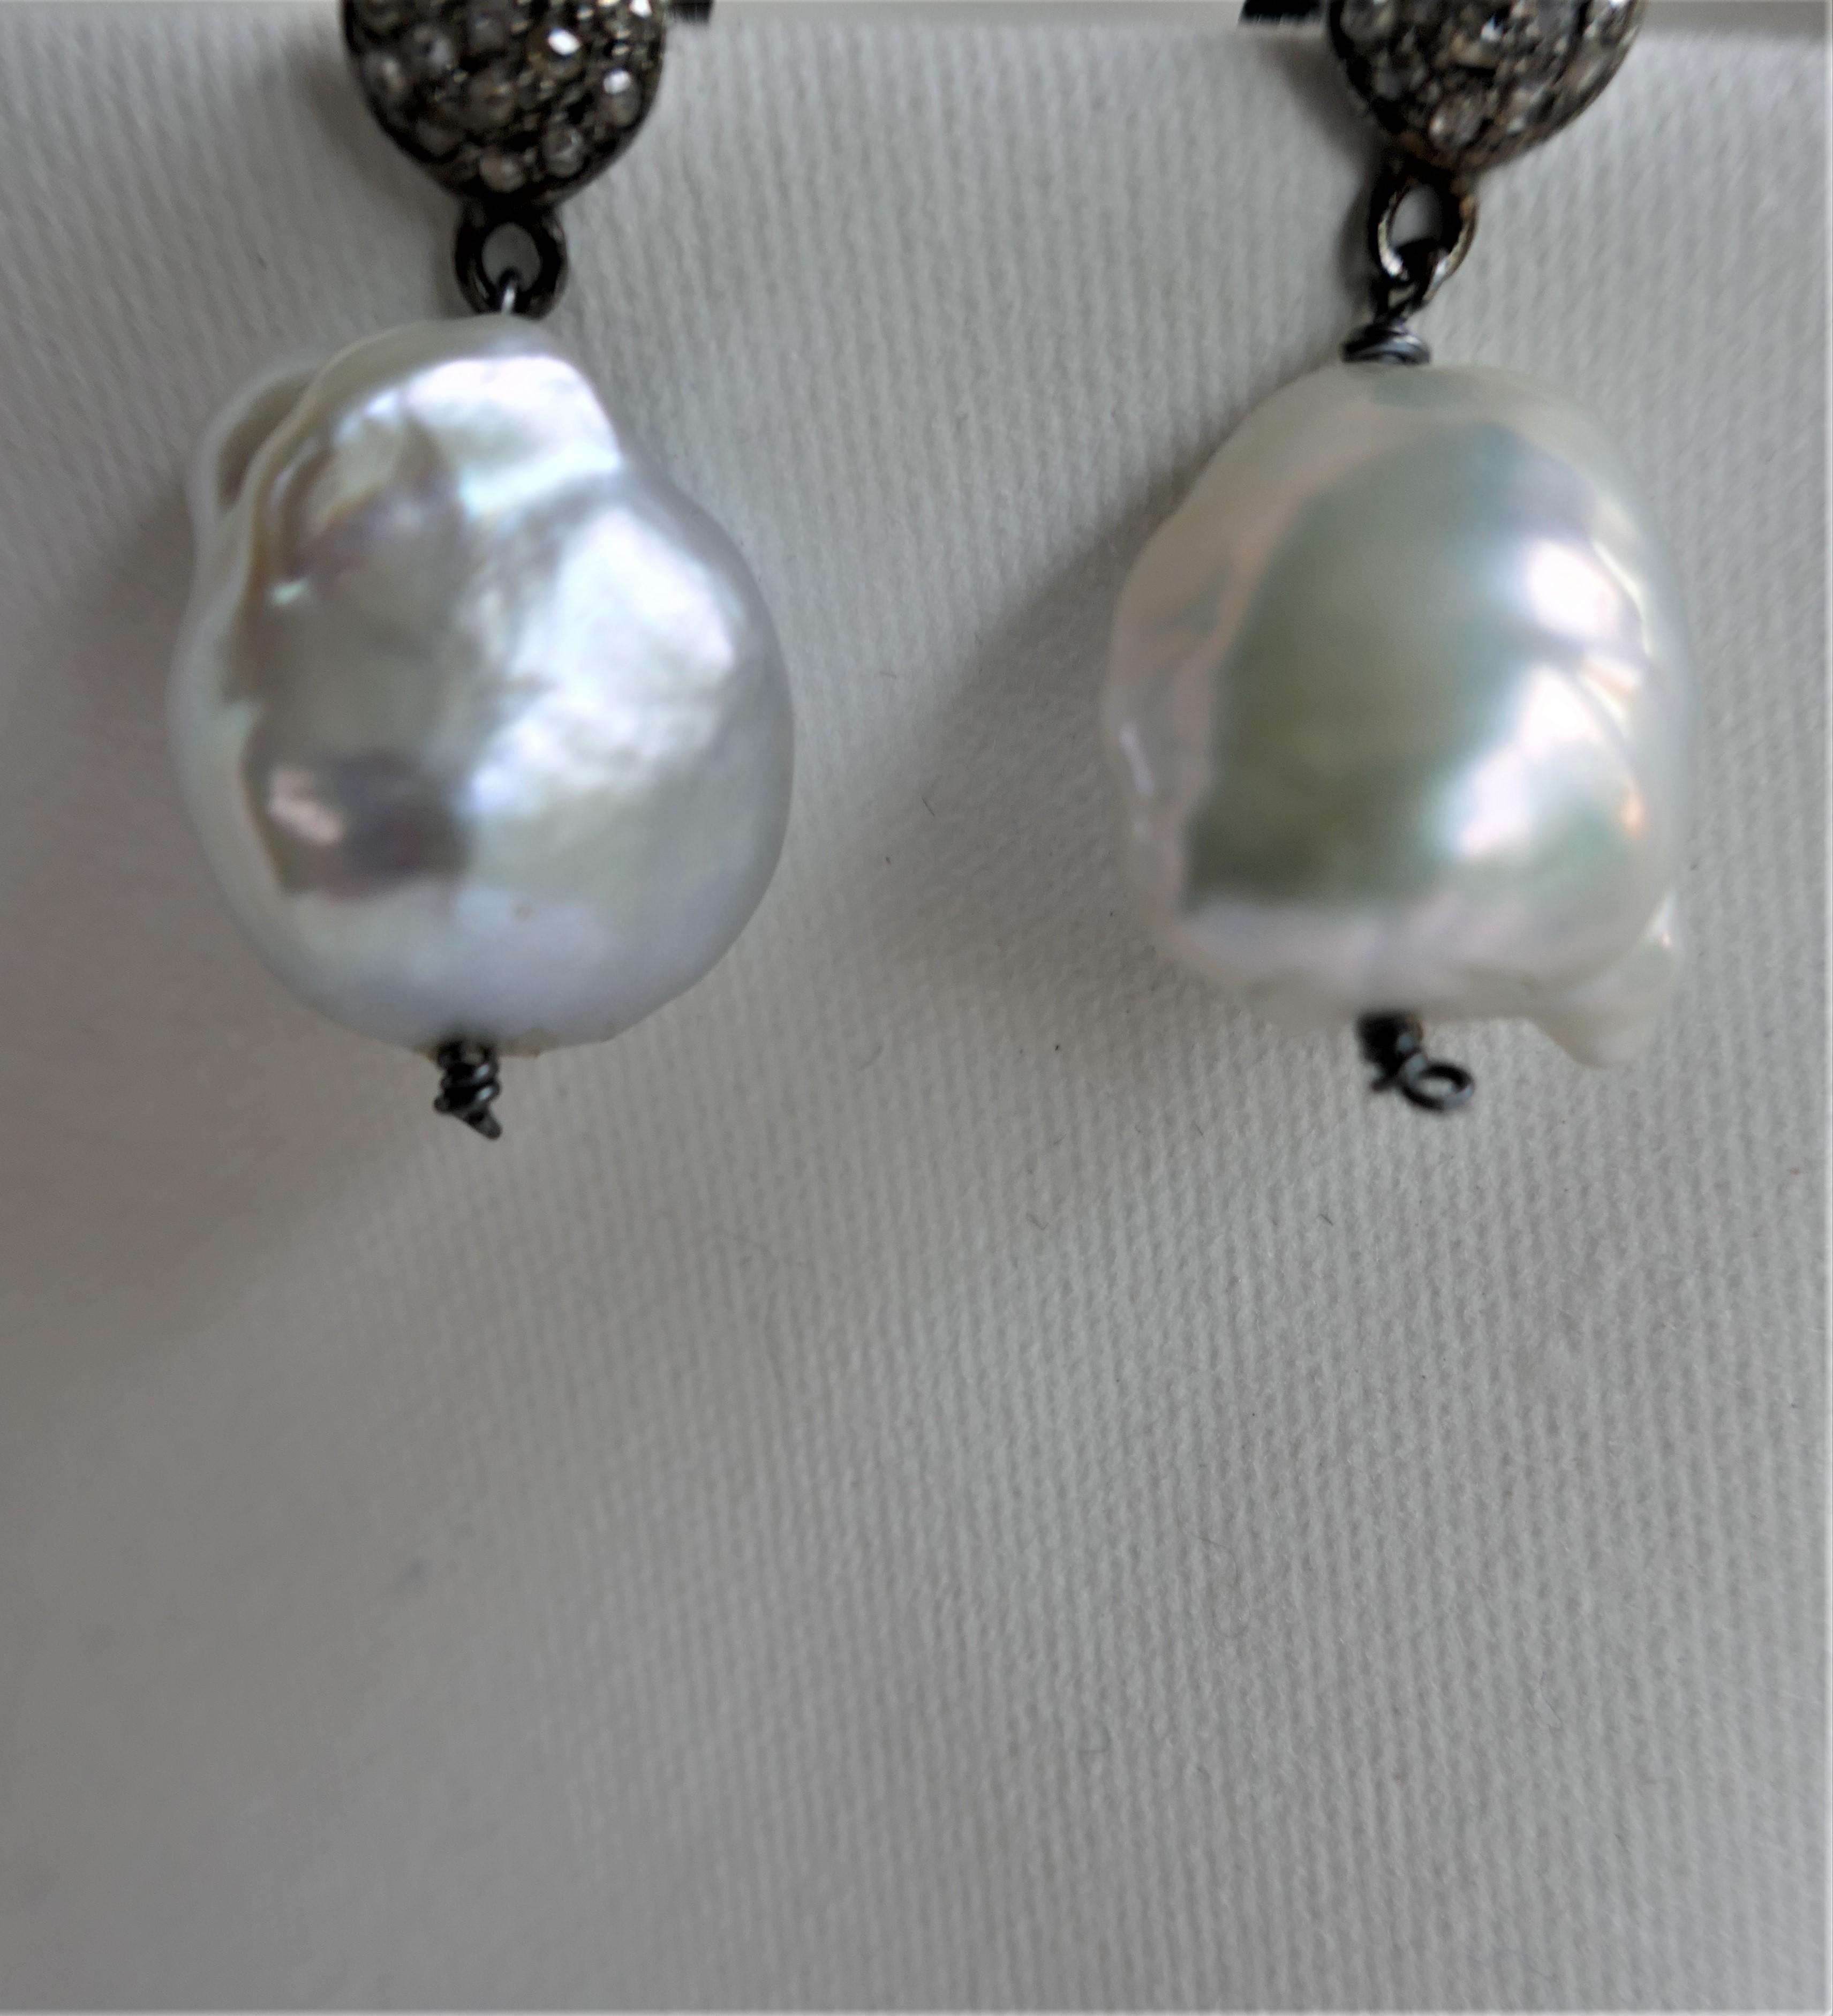 Love these earrings look beautiful on and are very wearable. The Baroque cultured  pearls are of excellent quality. These pearls are know as souffle pearls and are very light. The color is like a platinum white and are very luxurious. The pearls are